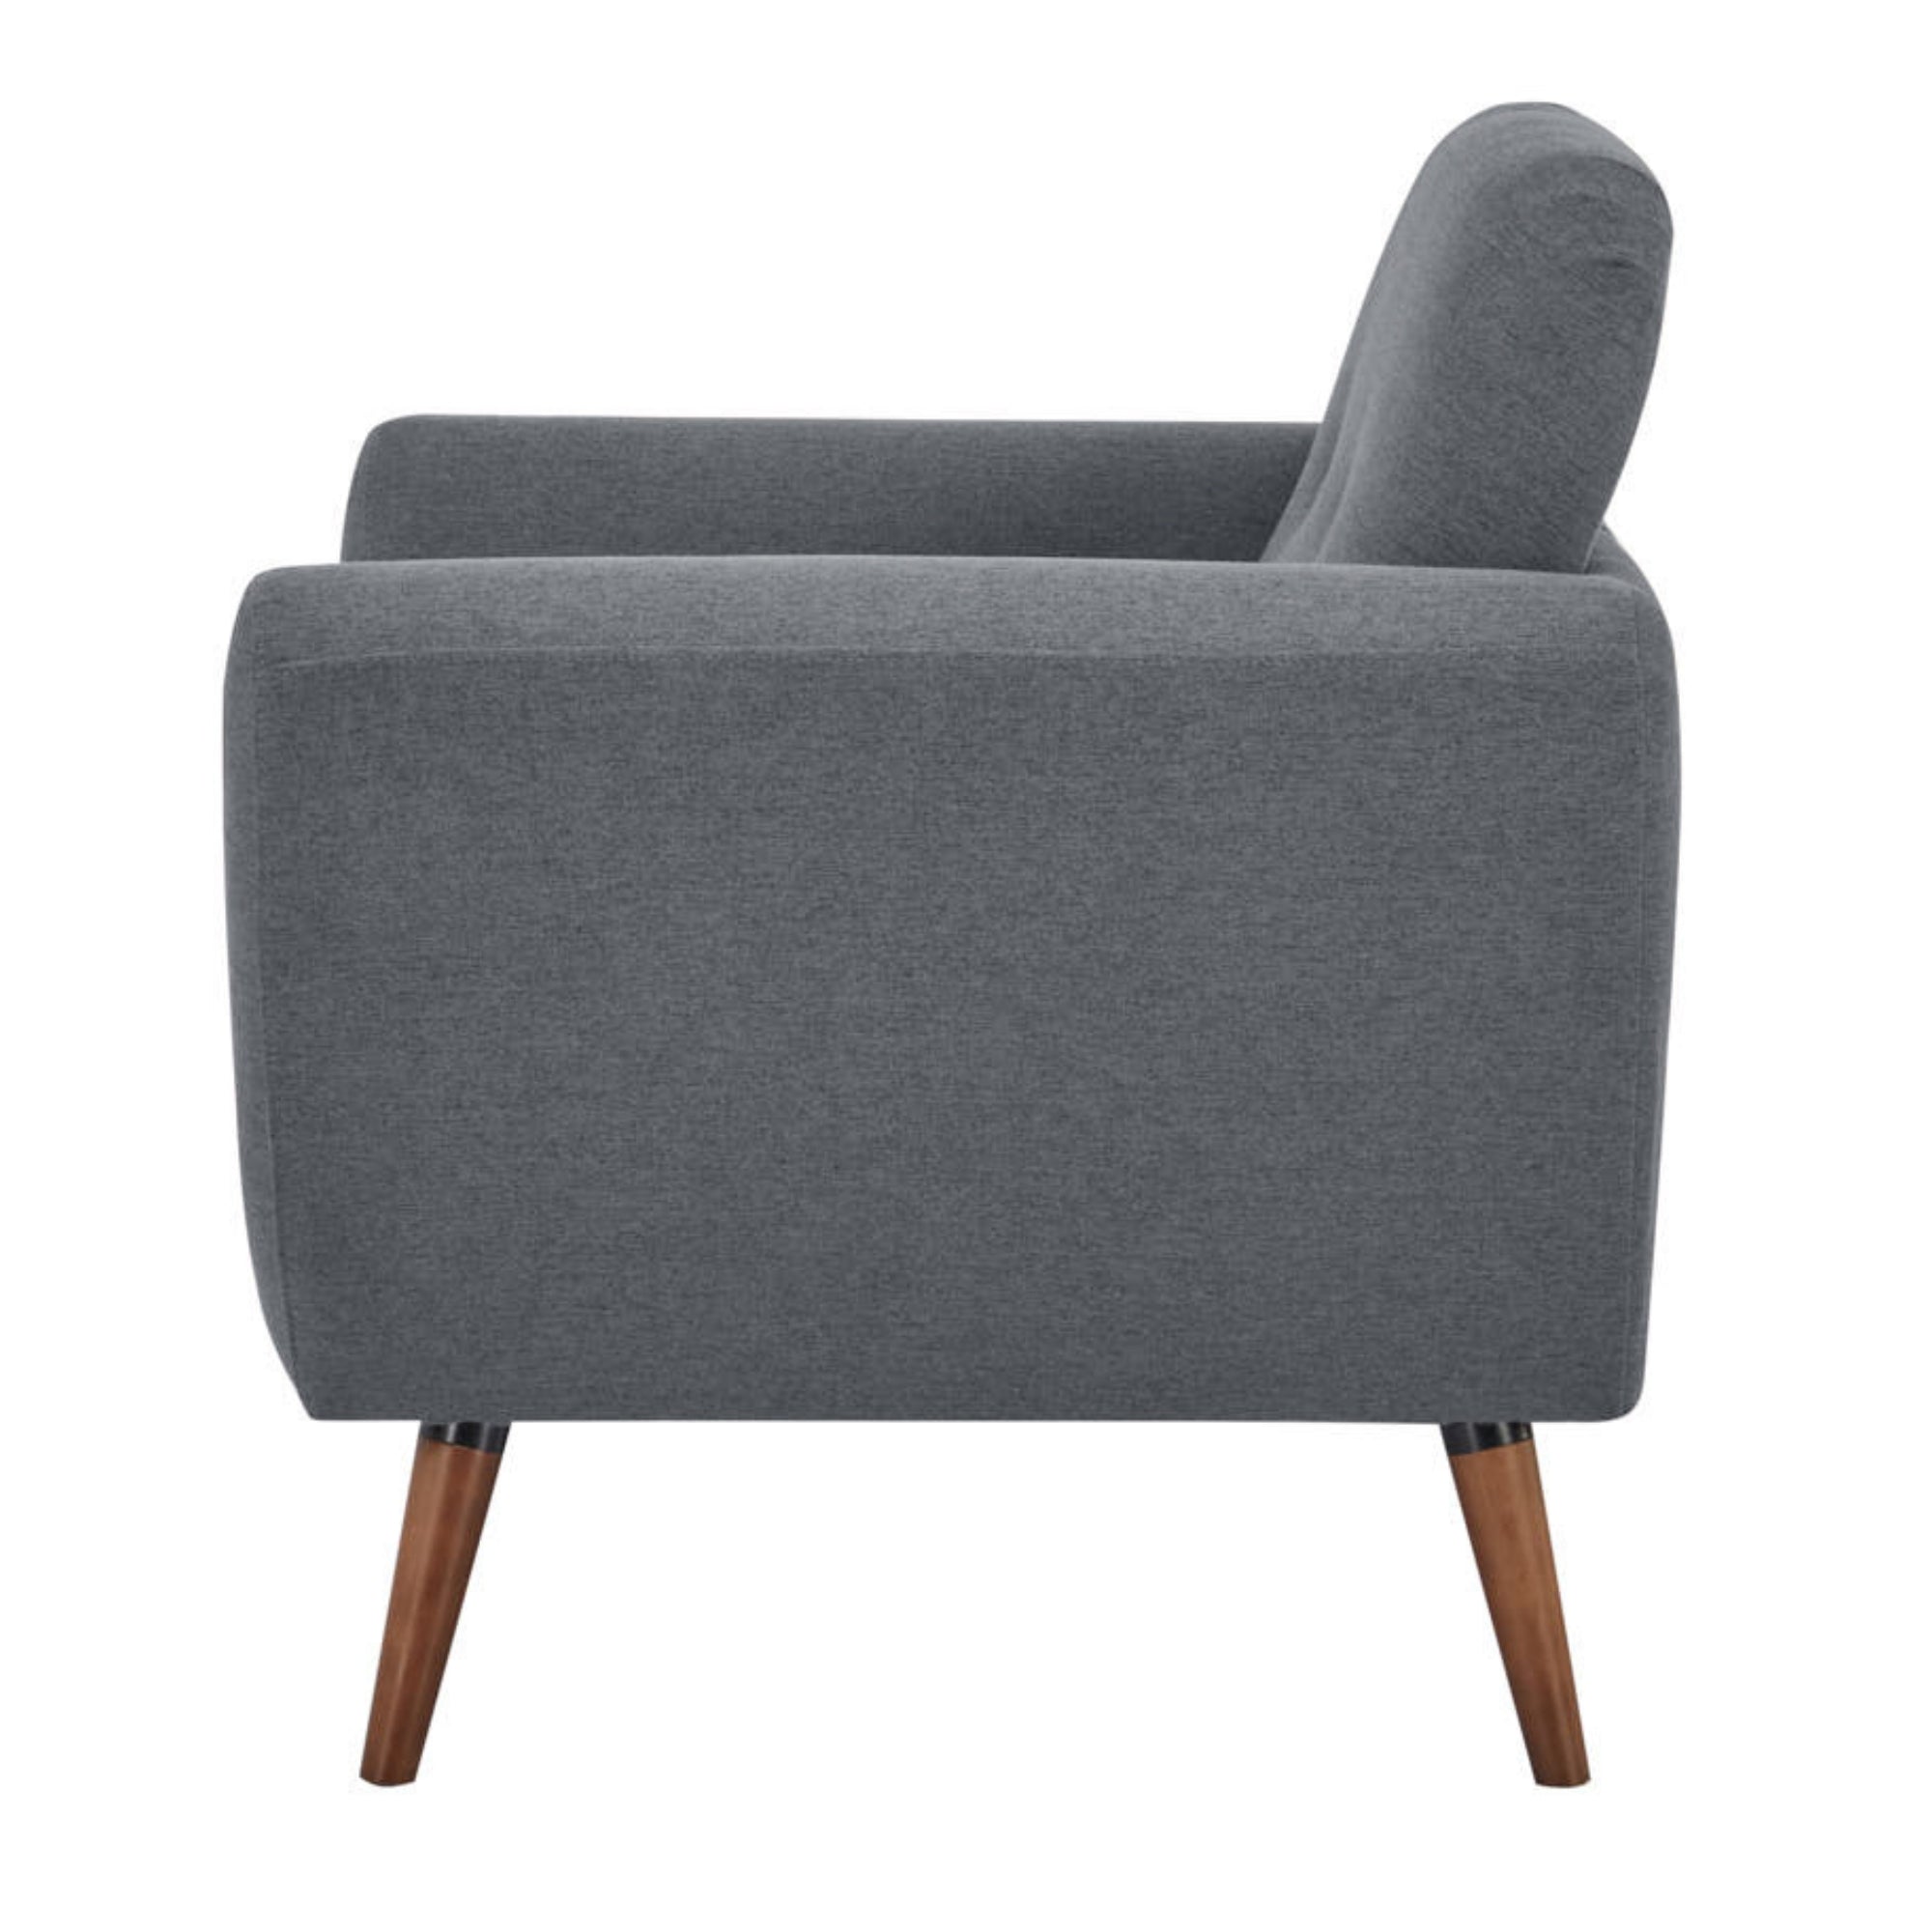 Dark Grey Fabric Upholstered Arm Chair, Foam Seat, Wooden Frame